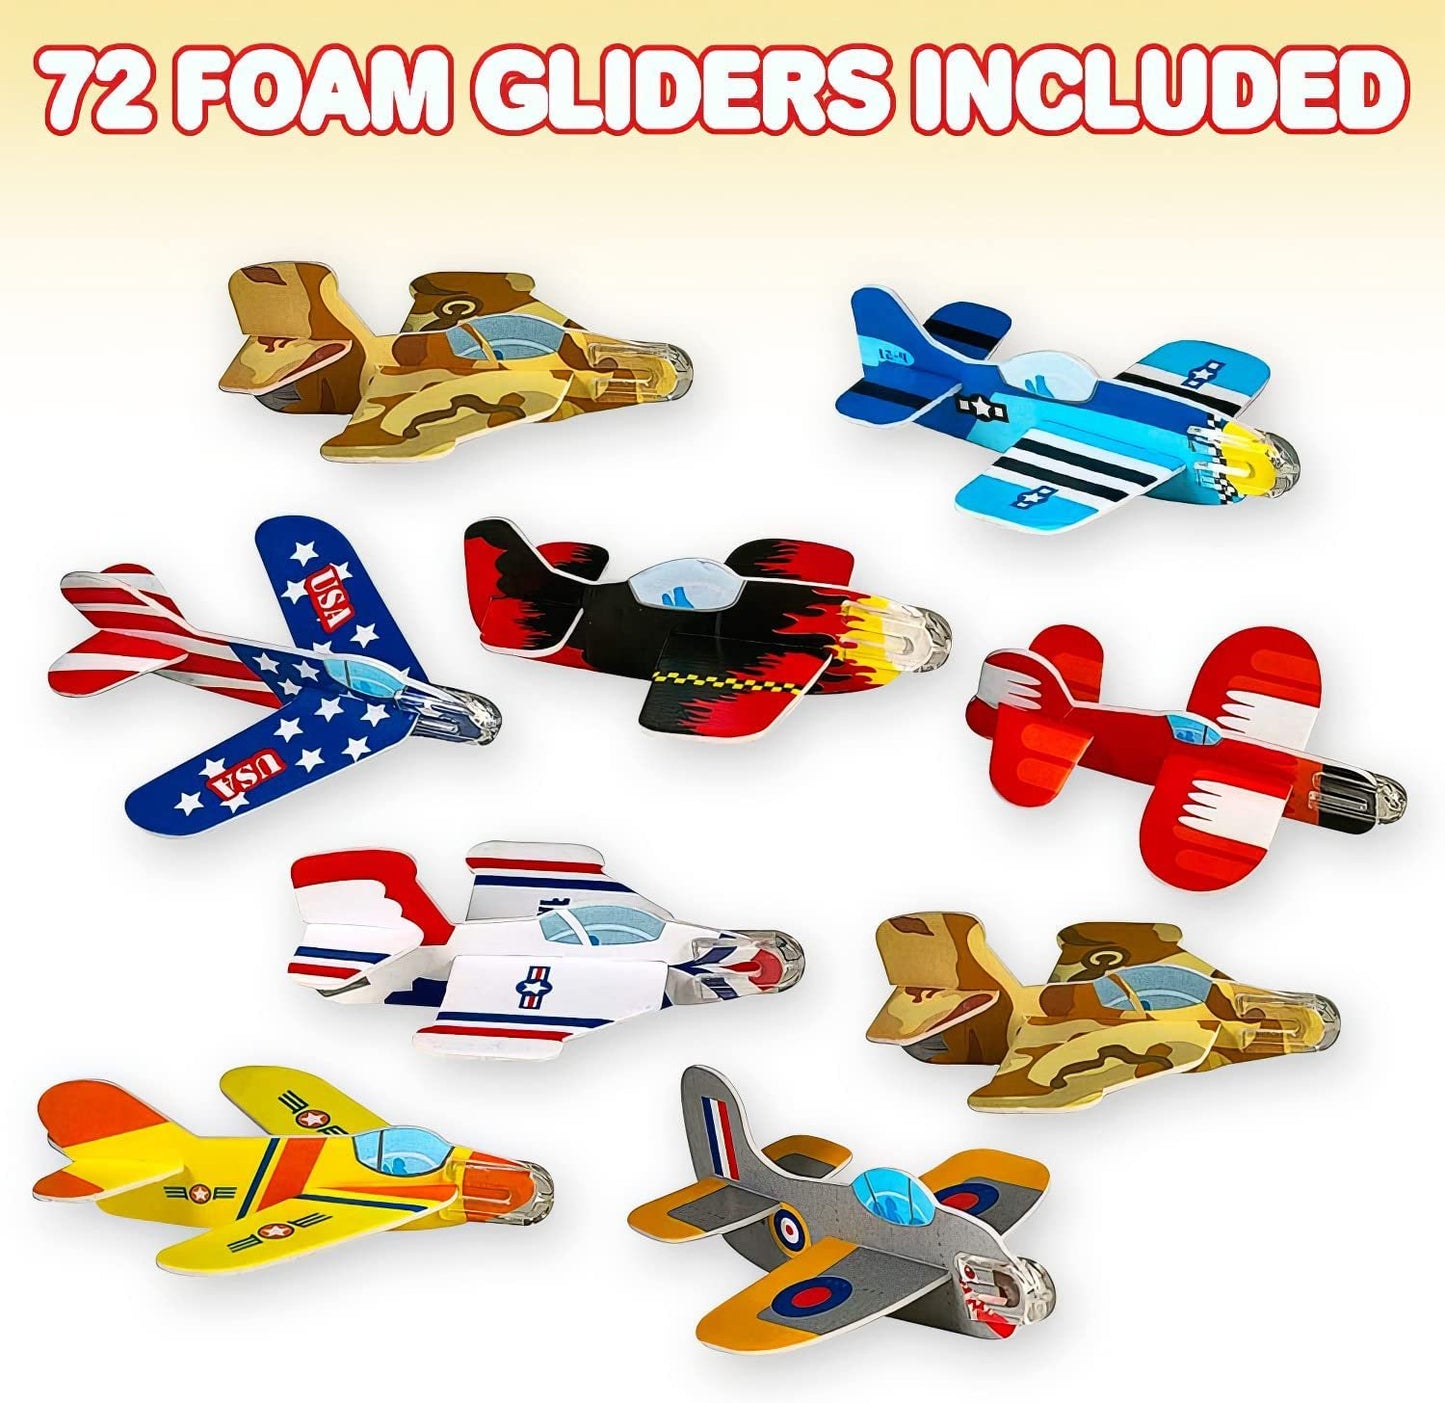 ArtCreativity Foam Gliders for Kids - Bulk Set of 72 - Lightweight Planes with Various Designs - Individually Packed Flying Airplanes - Fun Birthday Party Favors, Goodie Bag Fillers, Boys and Girls